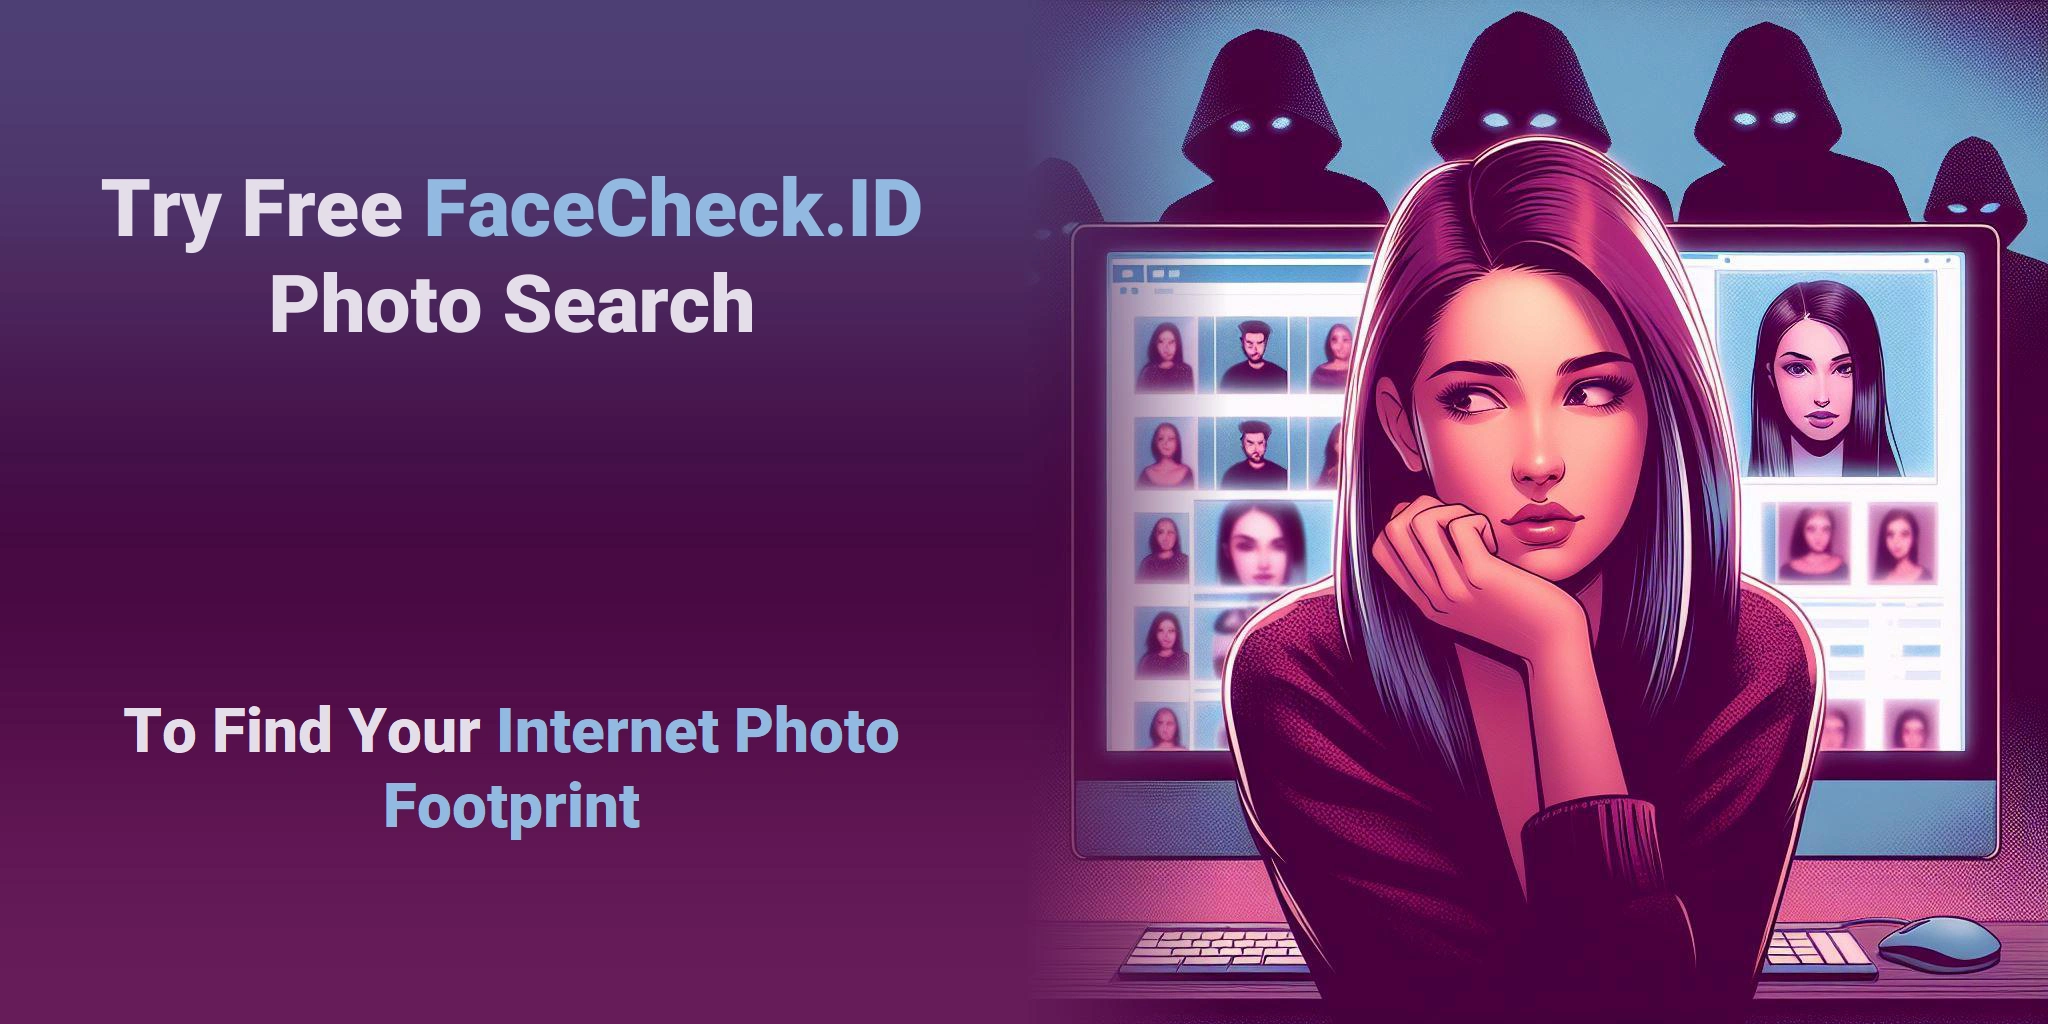 Try Free FaceCheck.ID Photo Search To Find Your Internet Photo Footprint